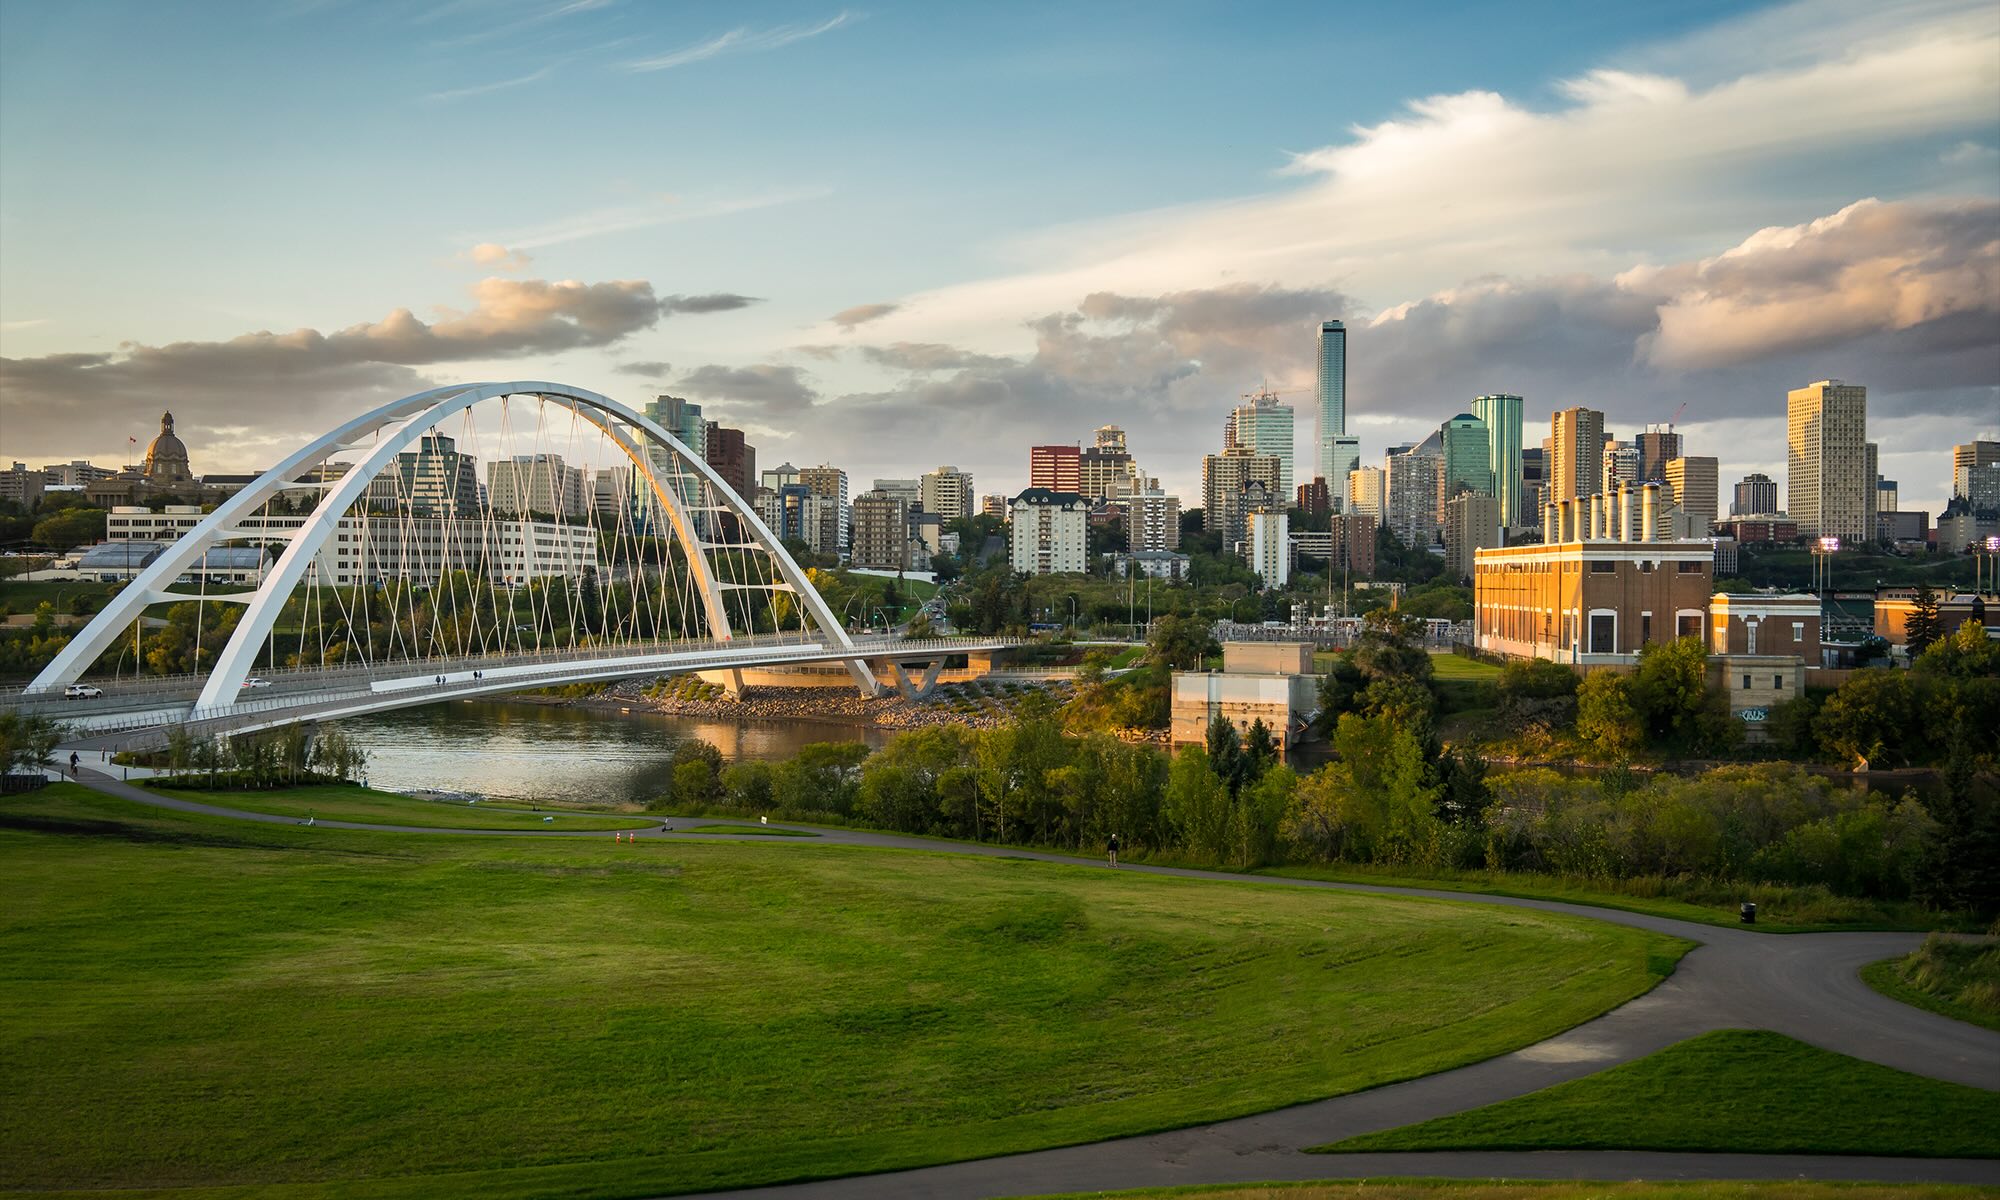 The City of Edmonton during summer or fall.